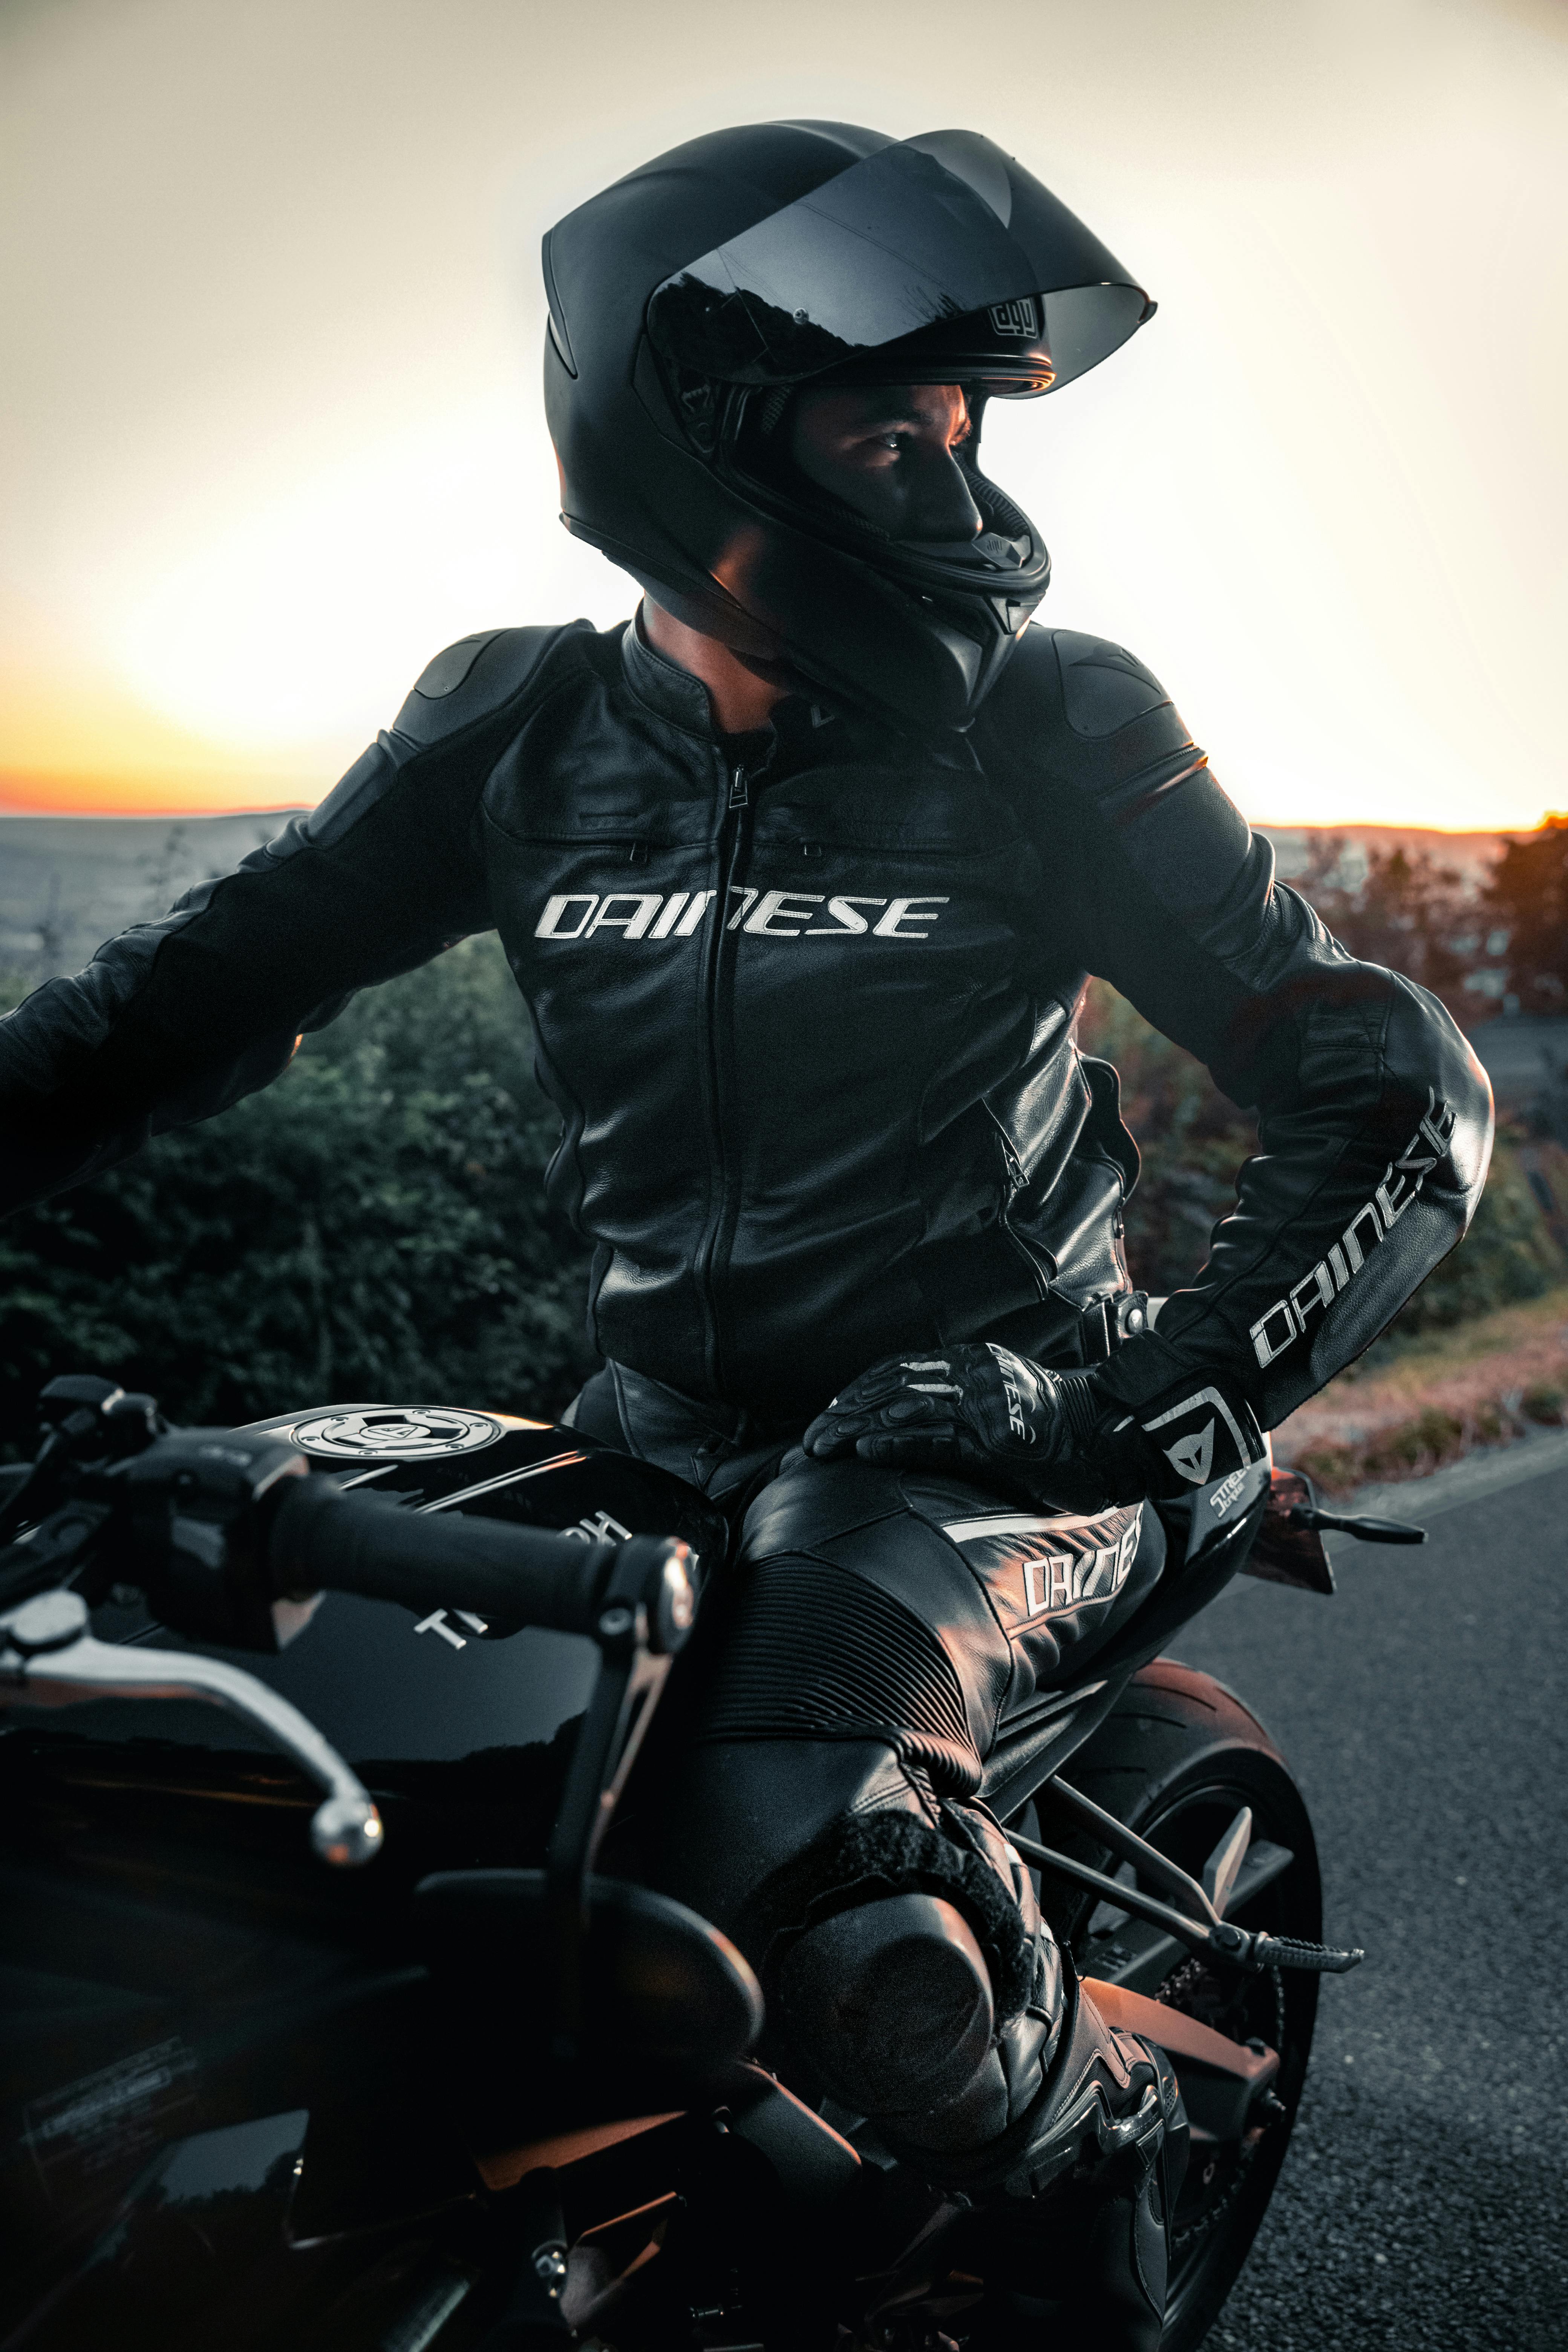 Black Leather Motorcycle Jacket Stock Photo - Download Image Now